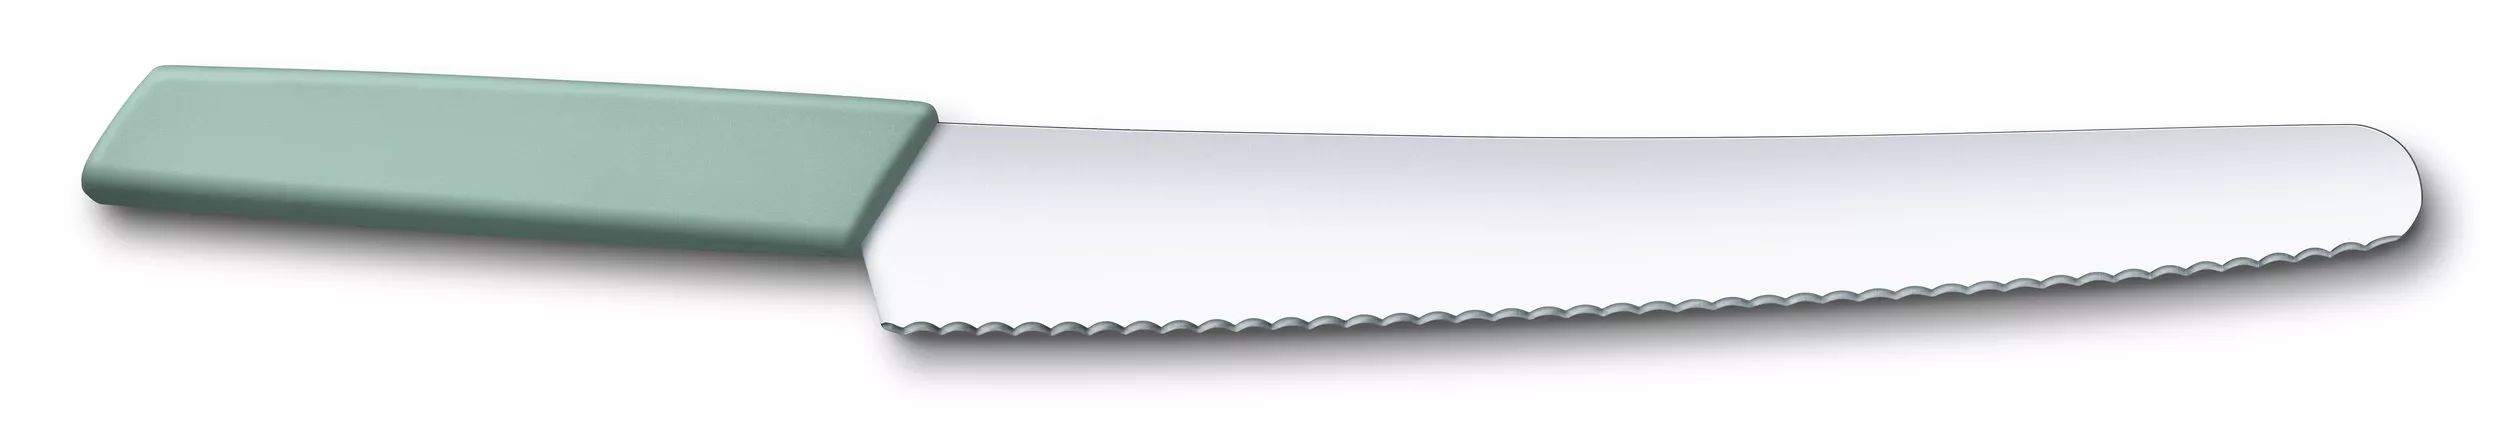 Swiss Modern Bread and Pastry Knife - 6.9076.26W44B